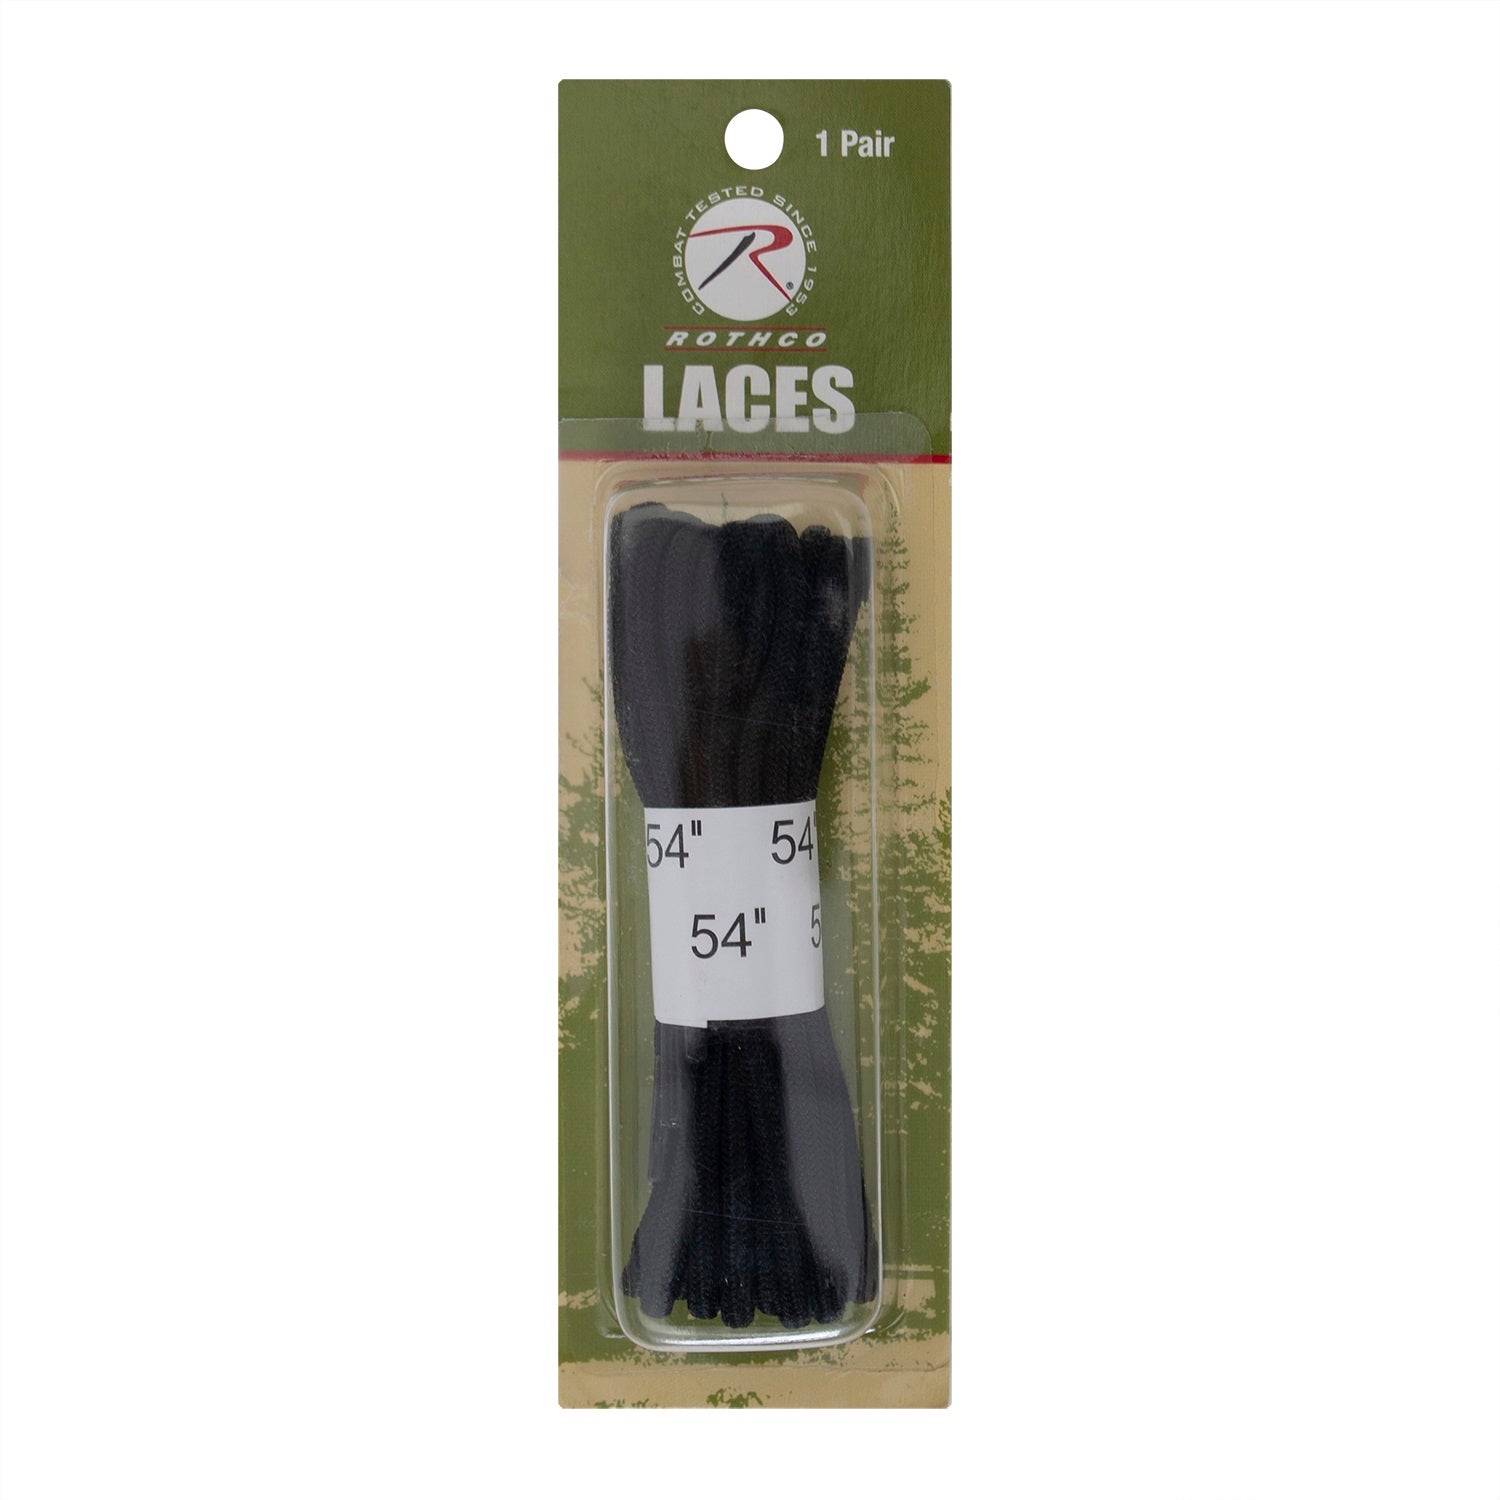 Rothco Boot Laces - CLOSEOUT!